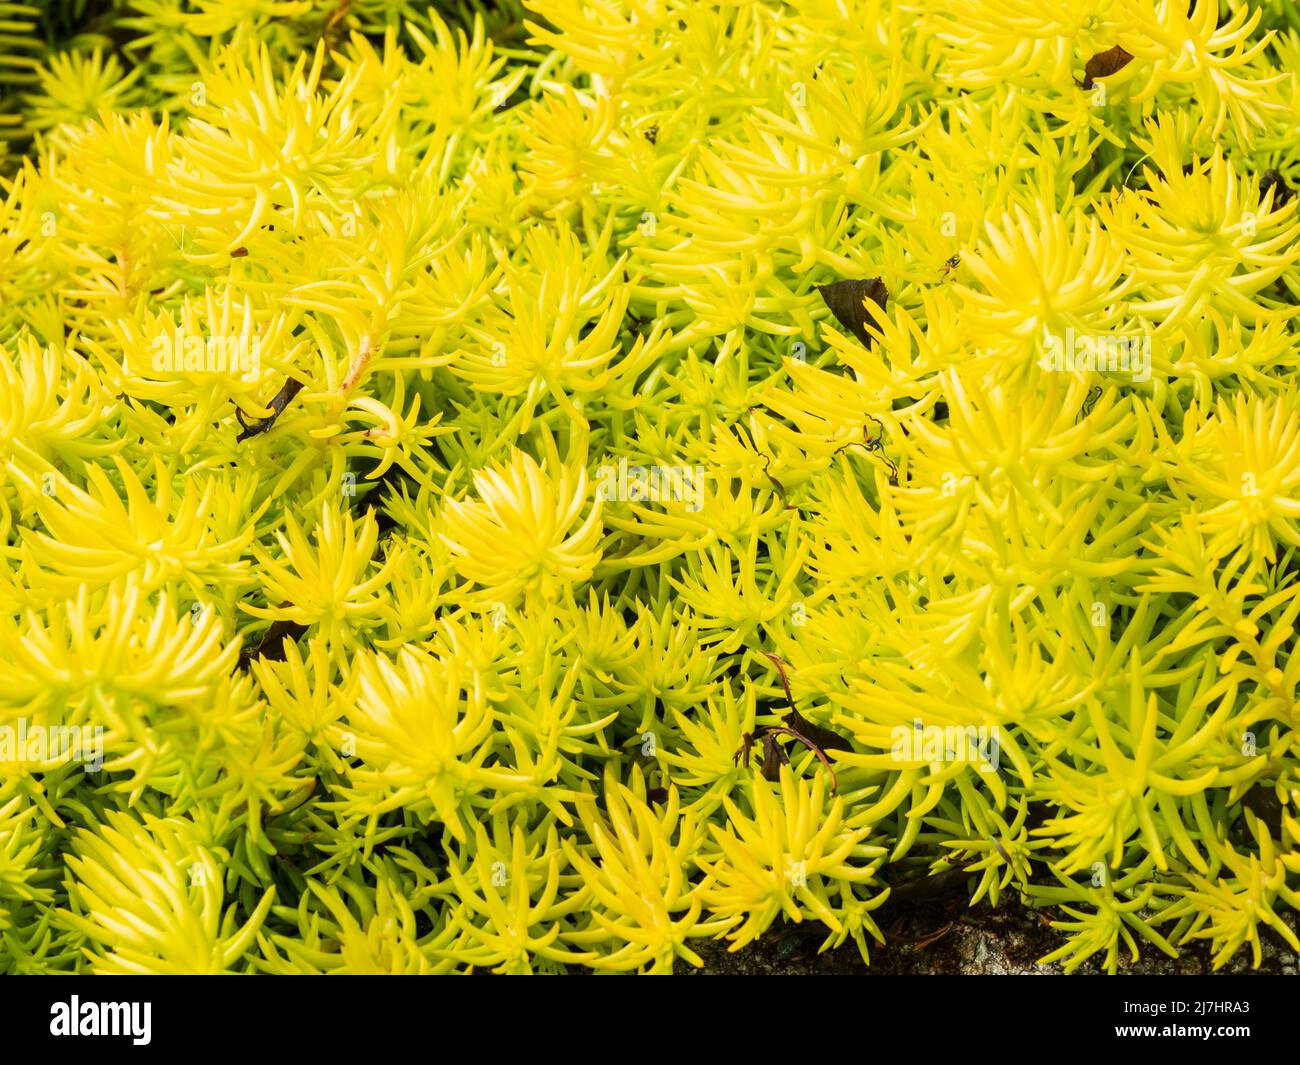 Spiky, rich yellow leaves of the hardy, carpeting, crooked yellow stonecrop, Sedum rupestre 'Angelina' Stock Photo